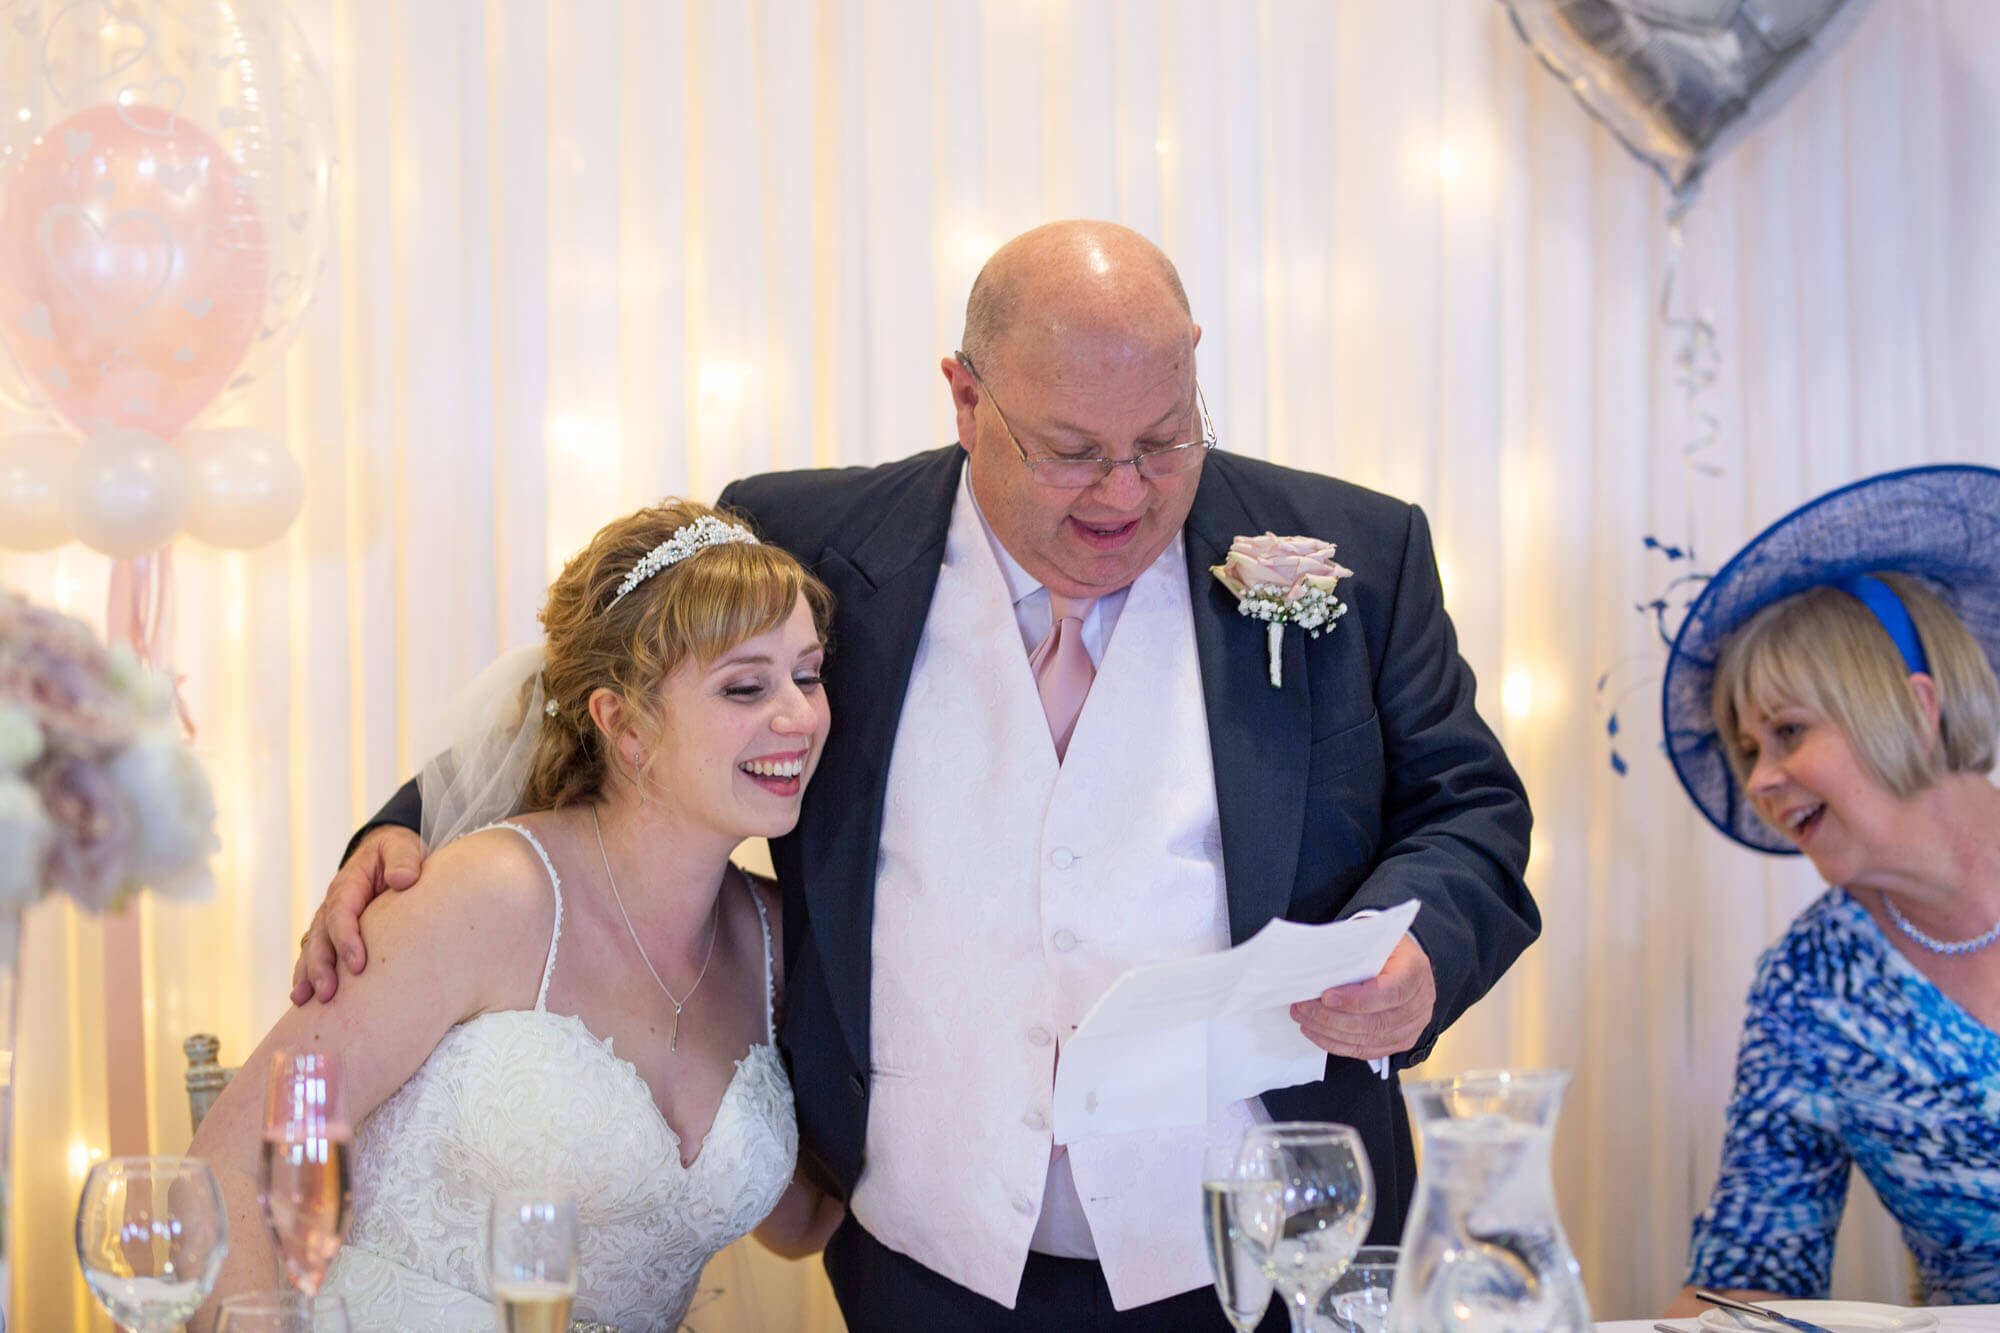 The father of the bride hugs his daughter during his speech